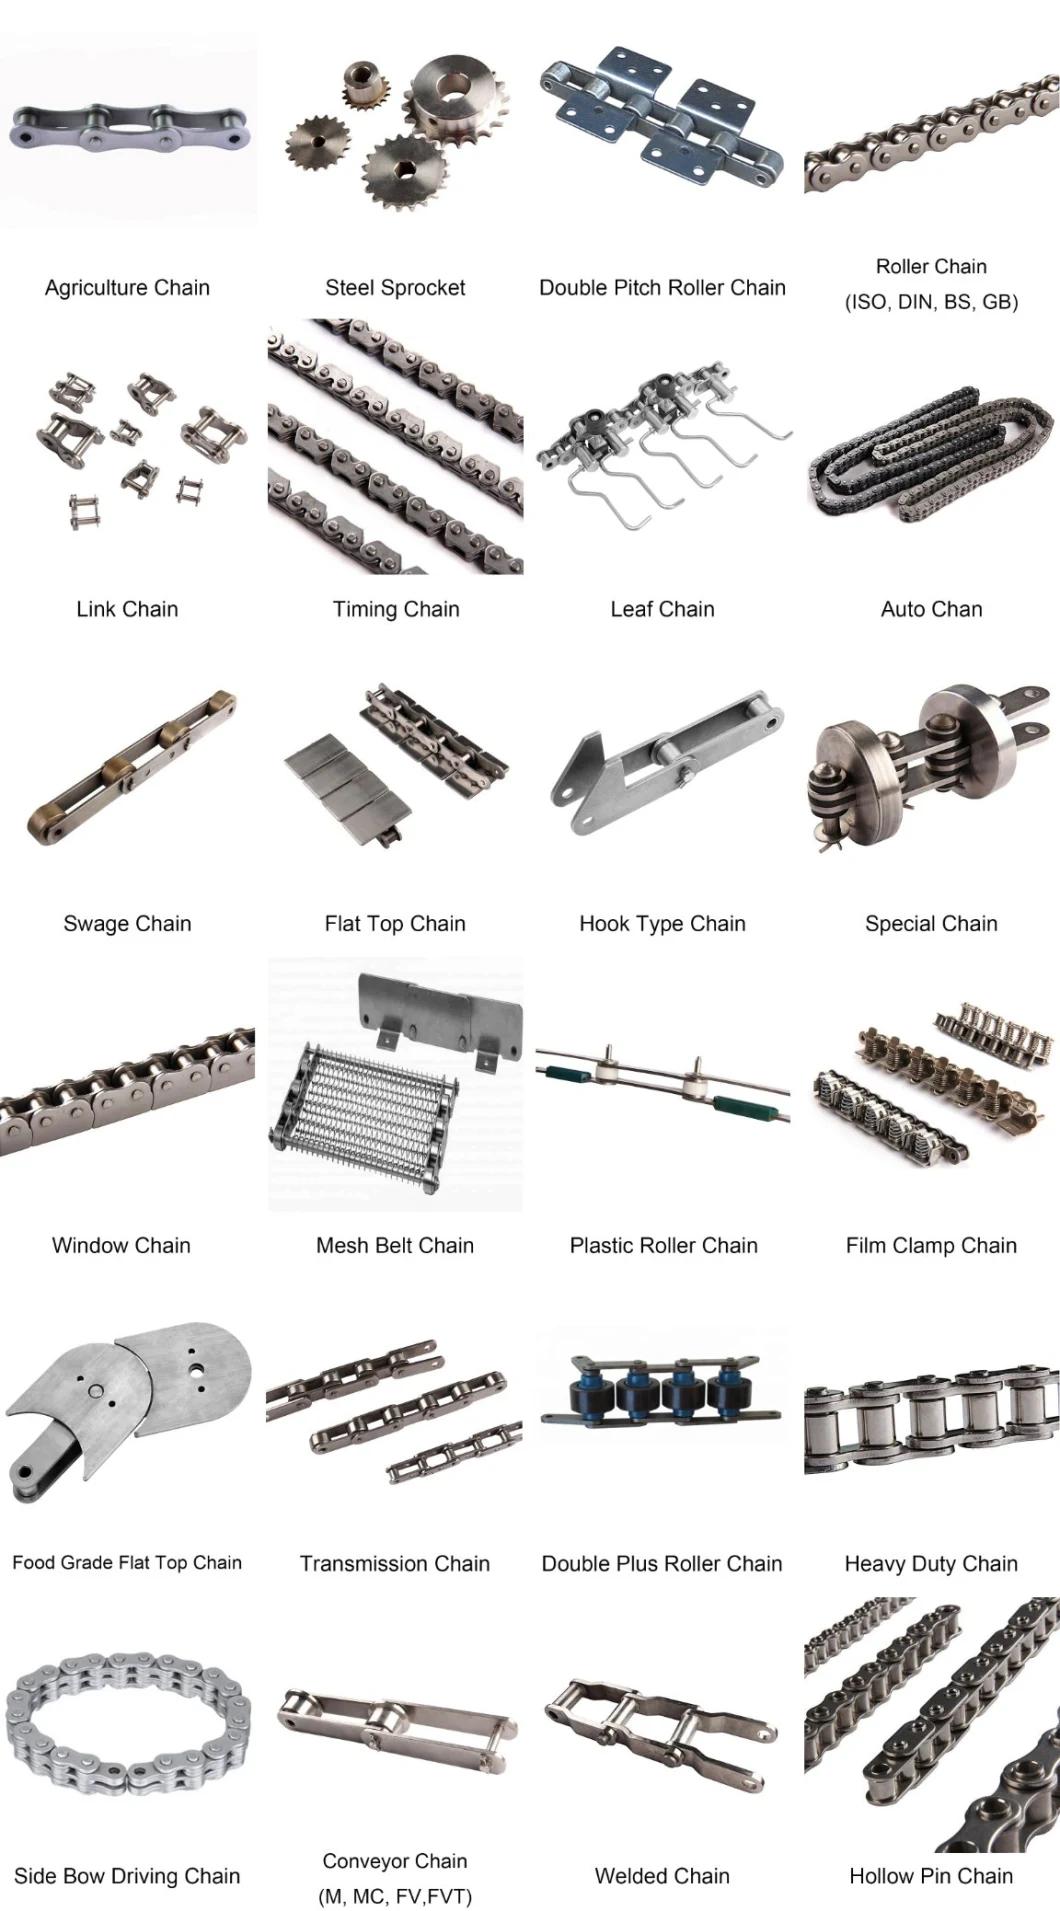 Stainless Steel Flat Top Chain Plate Linear Flat Top Chain Plate Turning Flat Top Conveyor Chain